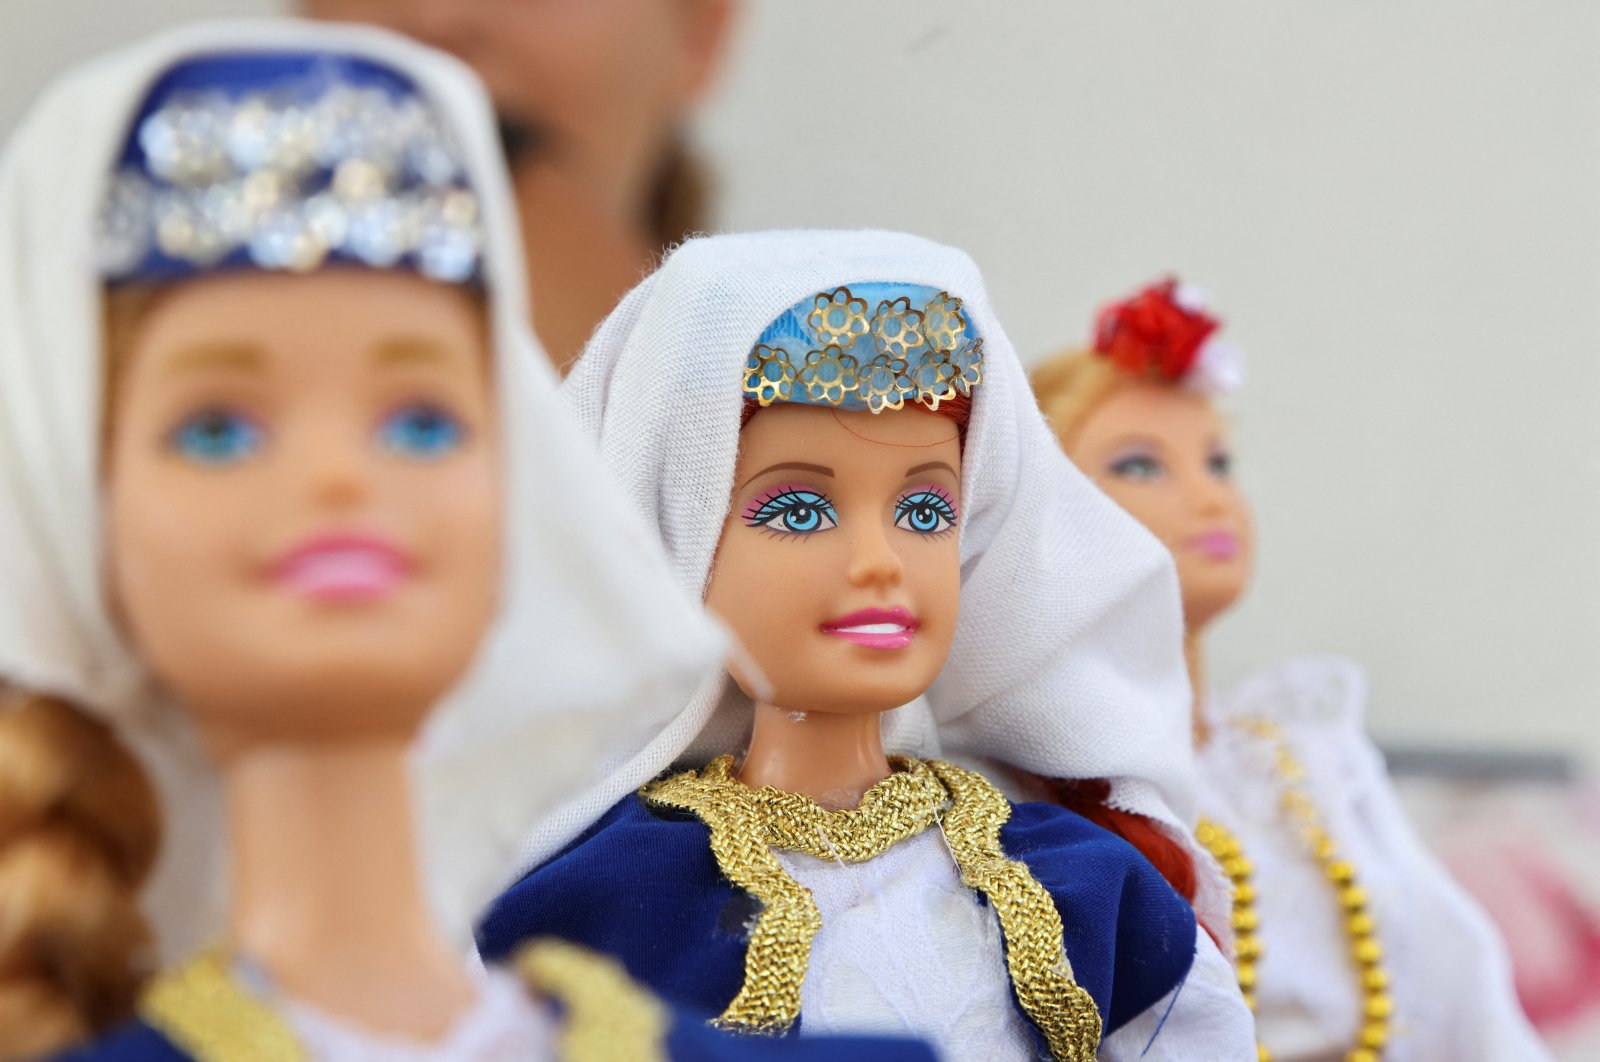 Dolls are displayed dressed in Bosnia&#039;s traditional folklore costumes made by 11-year-old Bosnian girl Esma Gljiva, who hopes that her folklore Barbie will reach many, as the frenzy surrounding the launch of the &quot;Barbie&quot; movie spreads across the world, Sarajevo, Bosnia and Herzegovina, Aug. 15, 2023. (Reuters Photo)